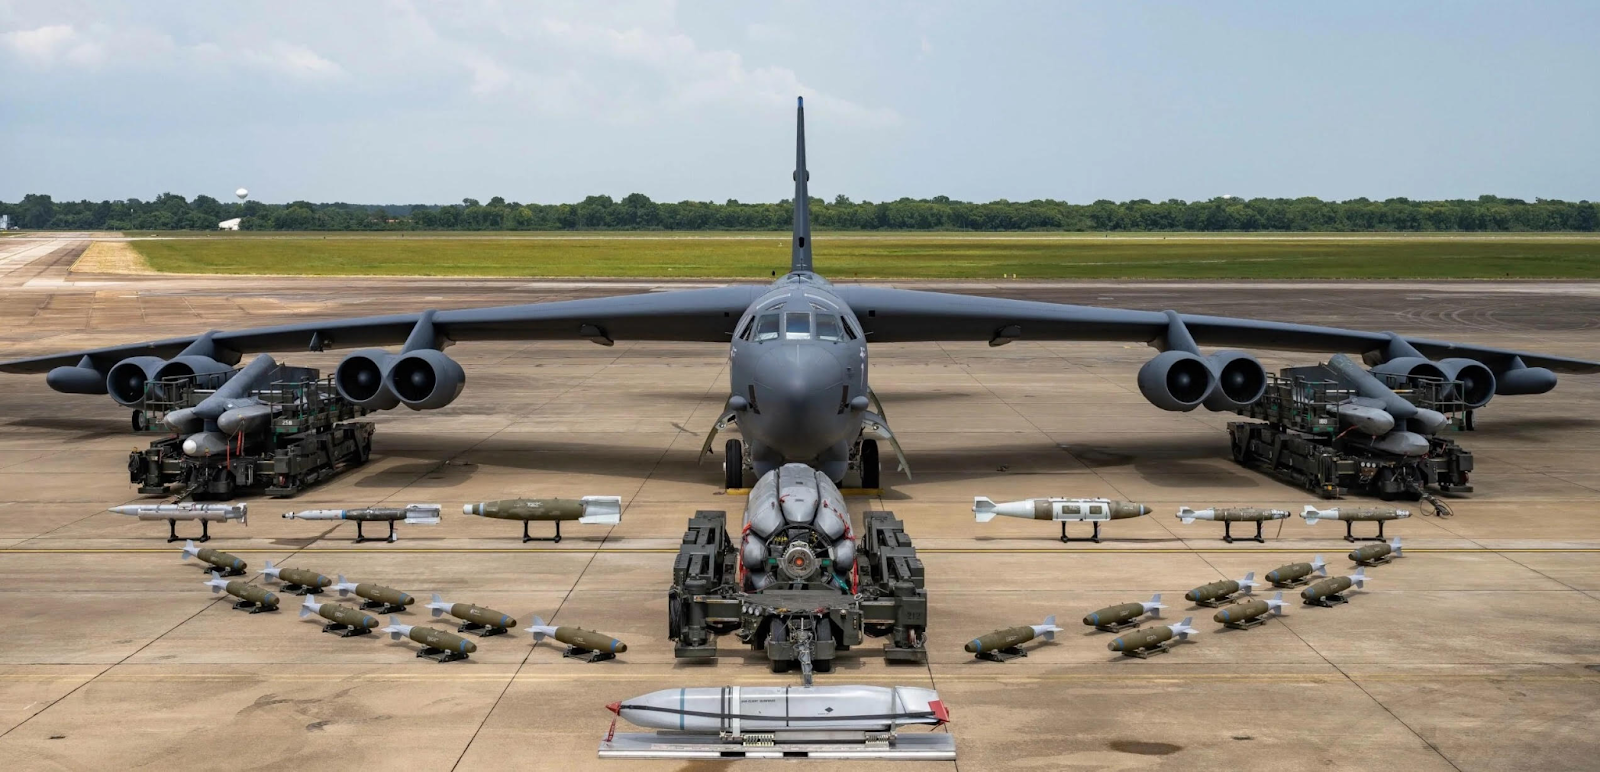 A B-52H Stratofortress with weapons display at Barksdale AFB, showing 20 (unarmed) nuclear ALCMs on pylons and rotary launcher. Source: United States Air Force